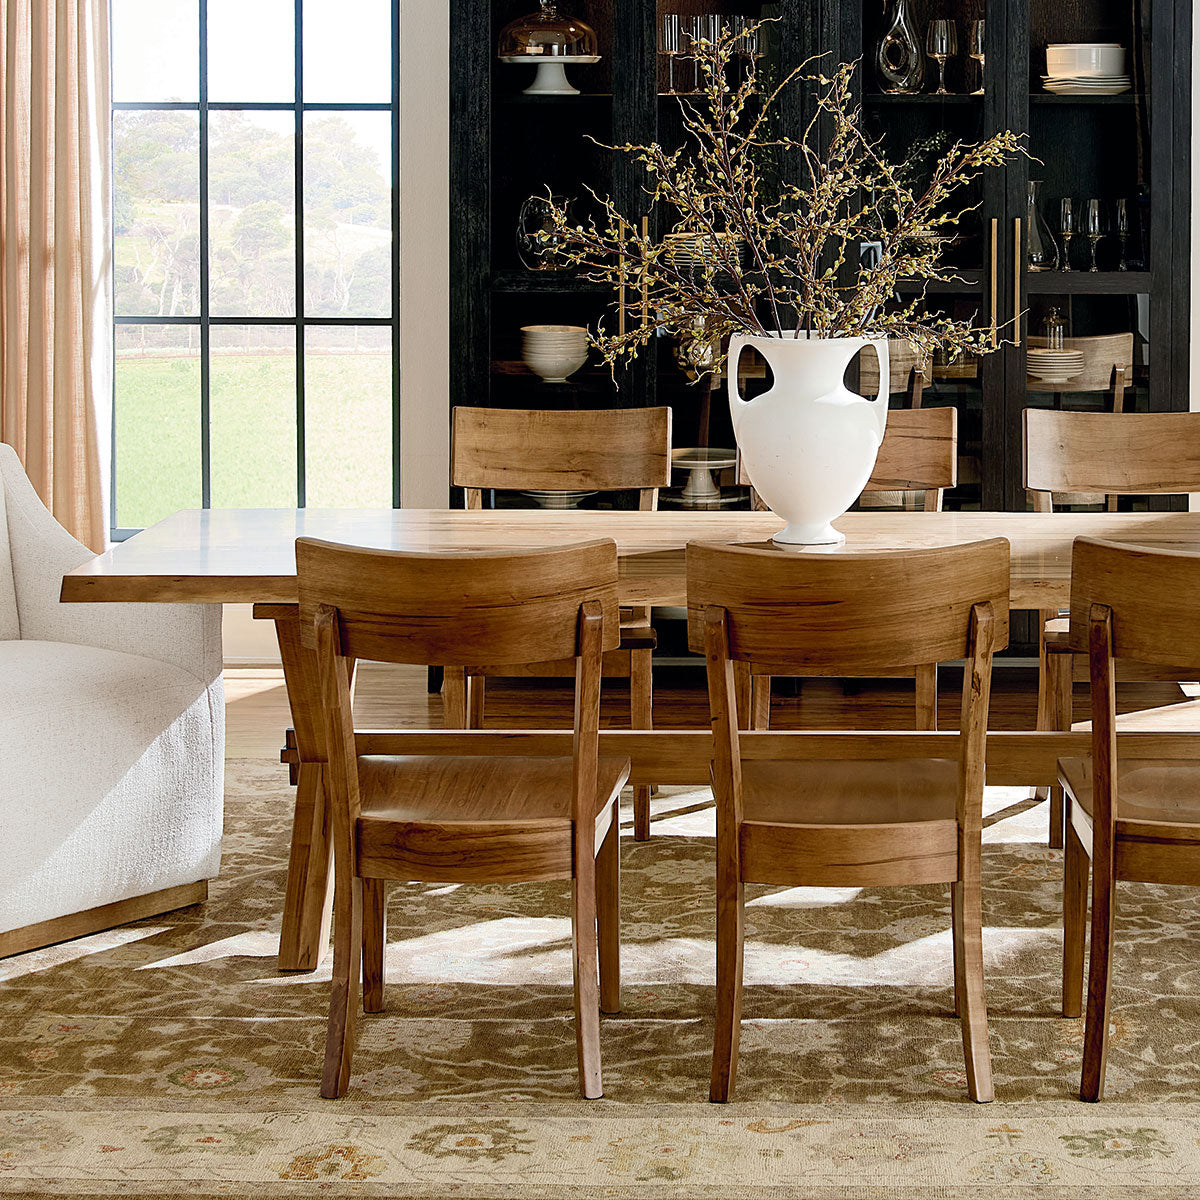 Rollins Maple Dining Chair